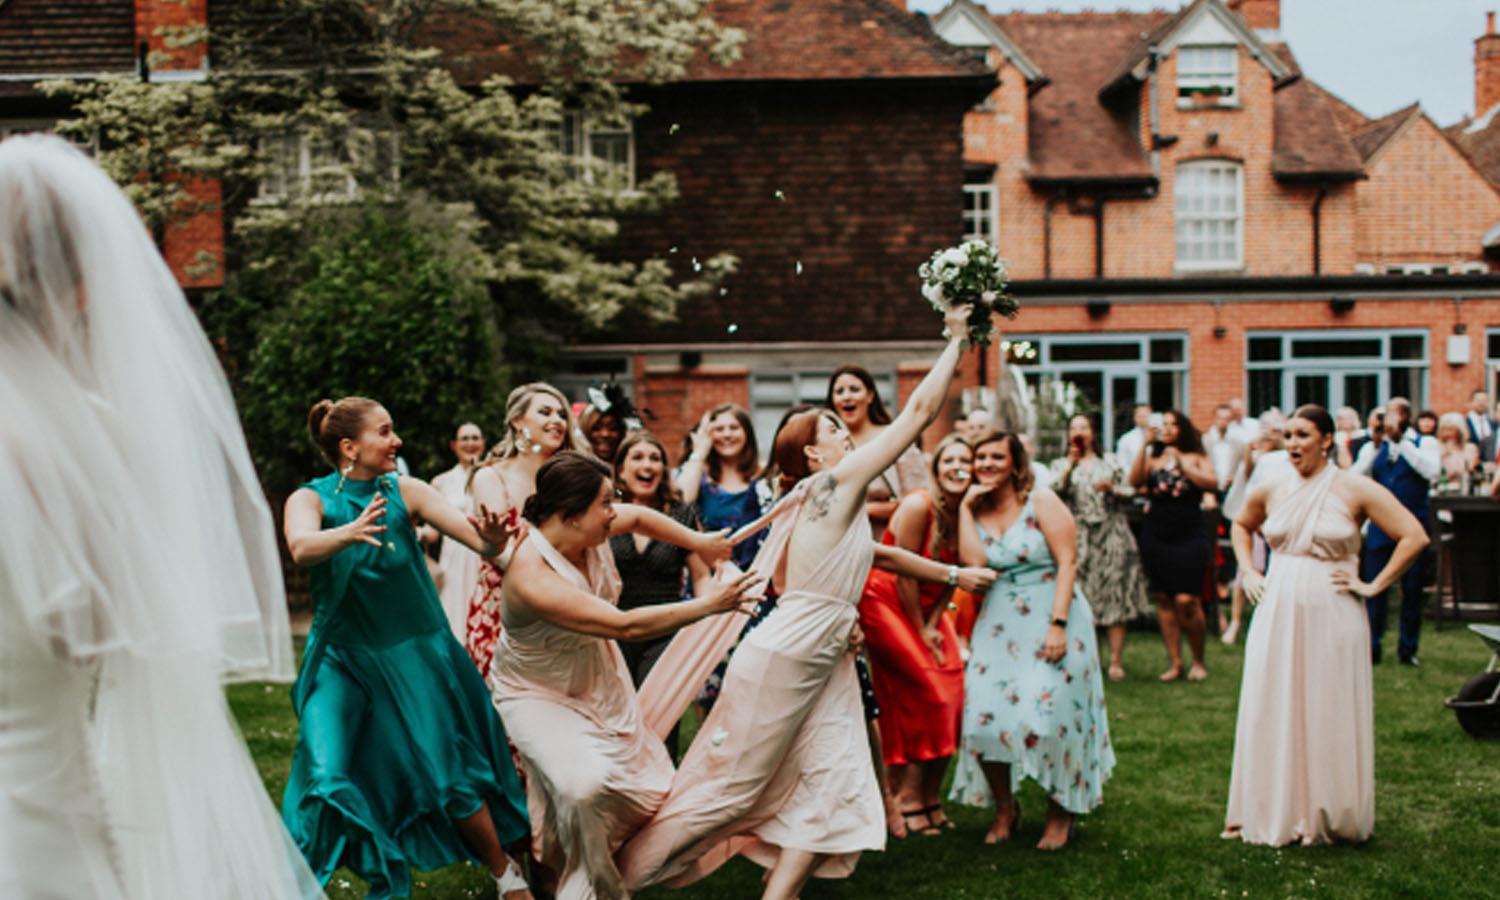 Bridesmaid catching the bouquet at The Elephant Hotel. Photo Credit: Oxana Mazur Photography